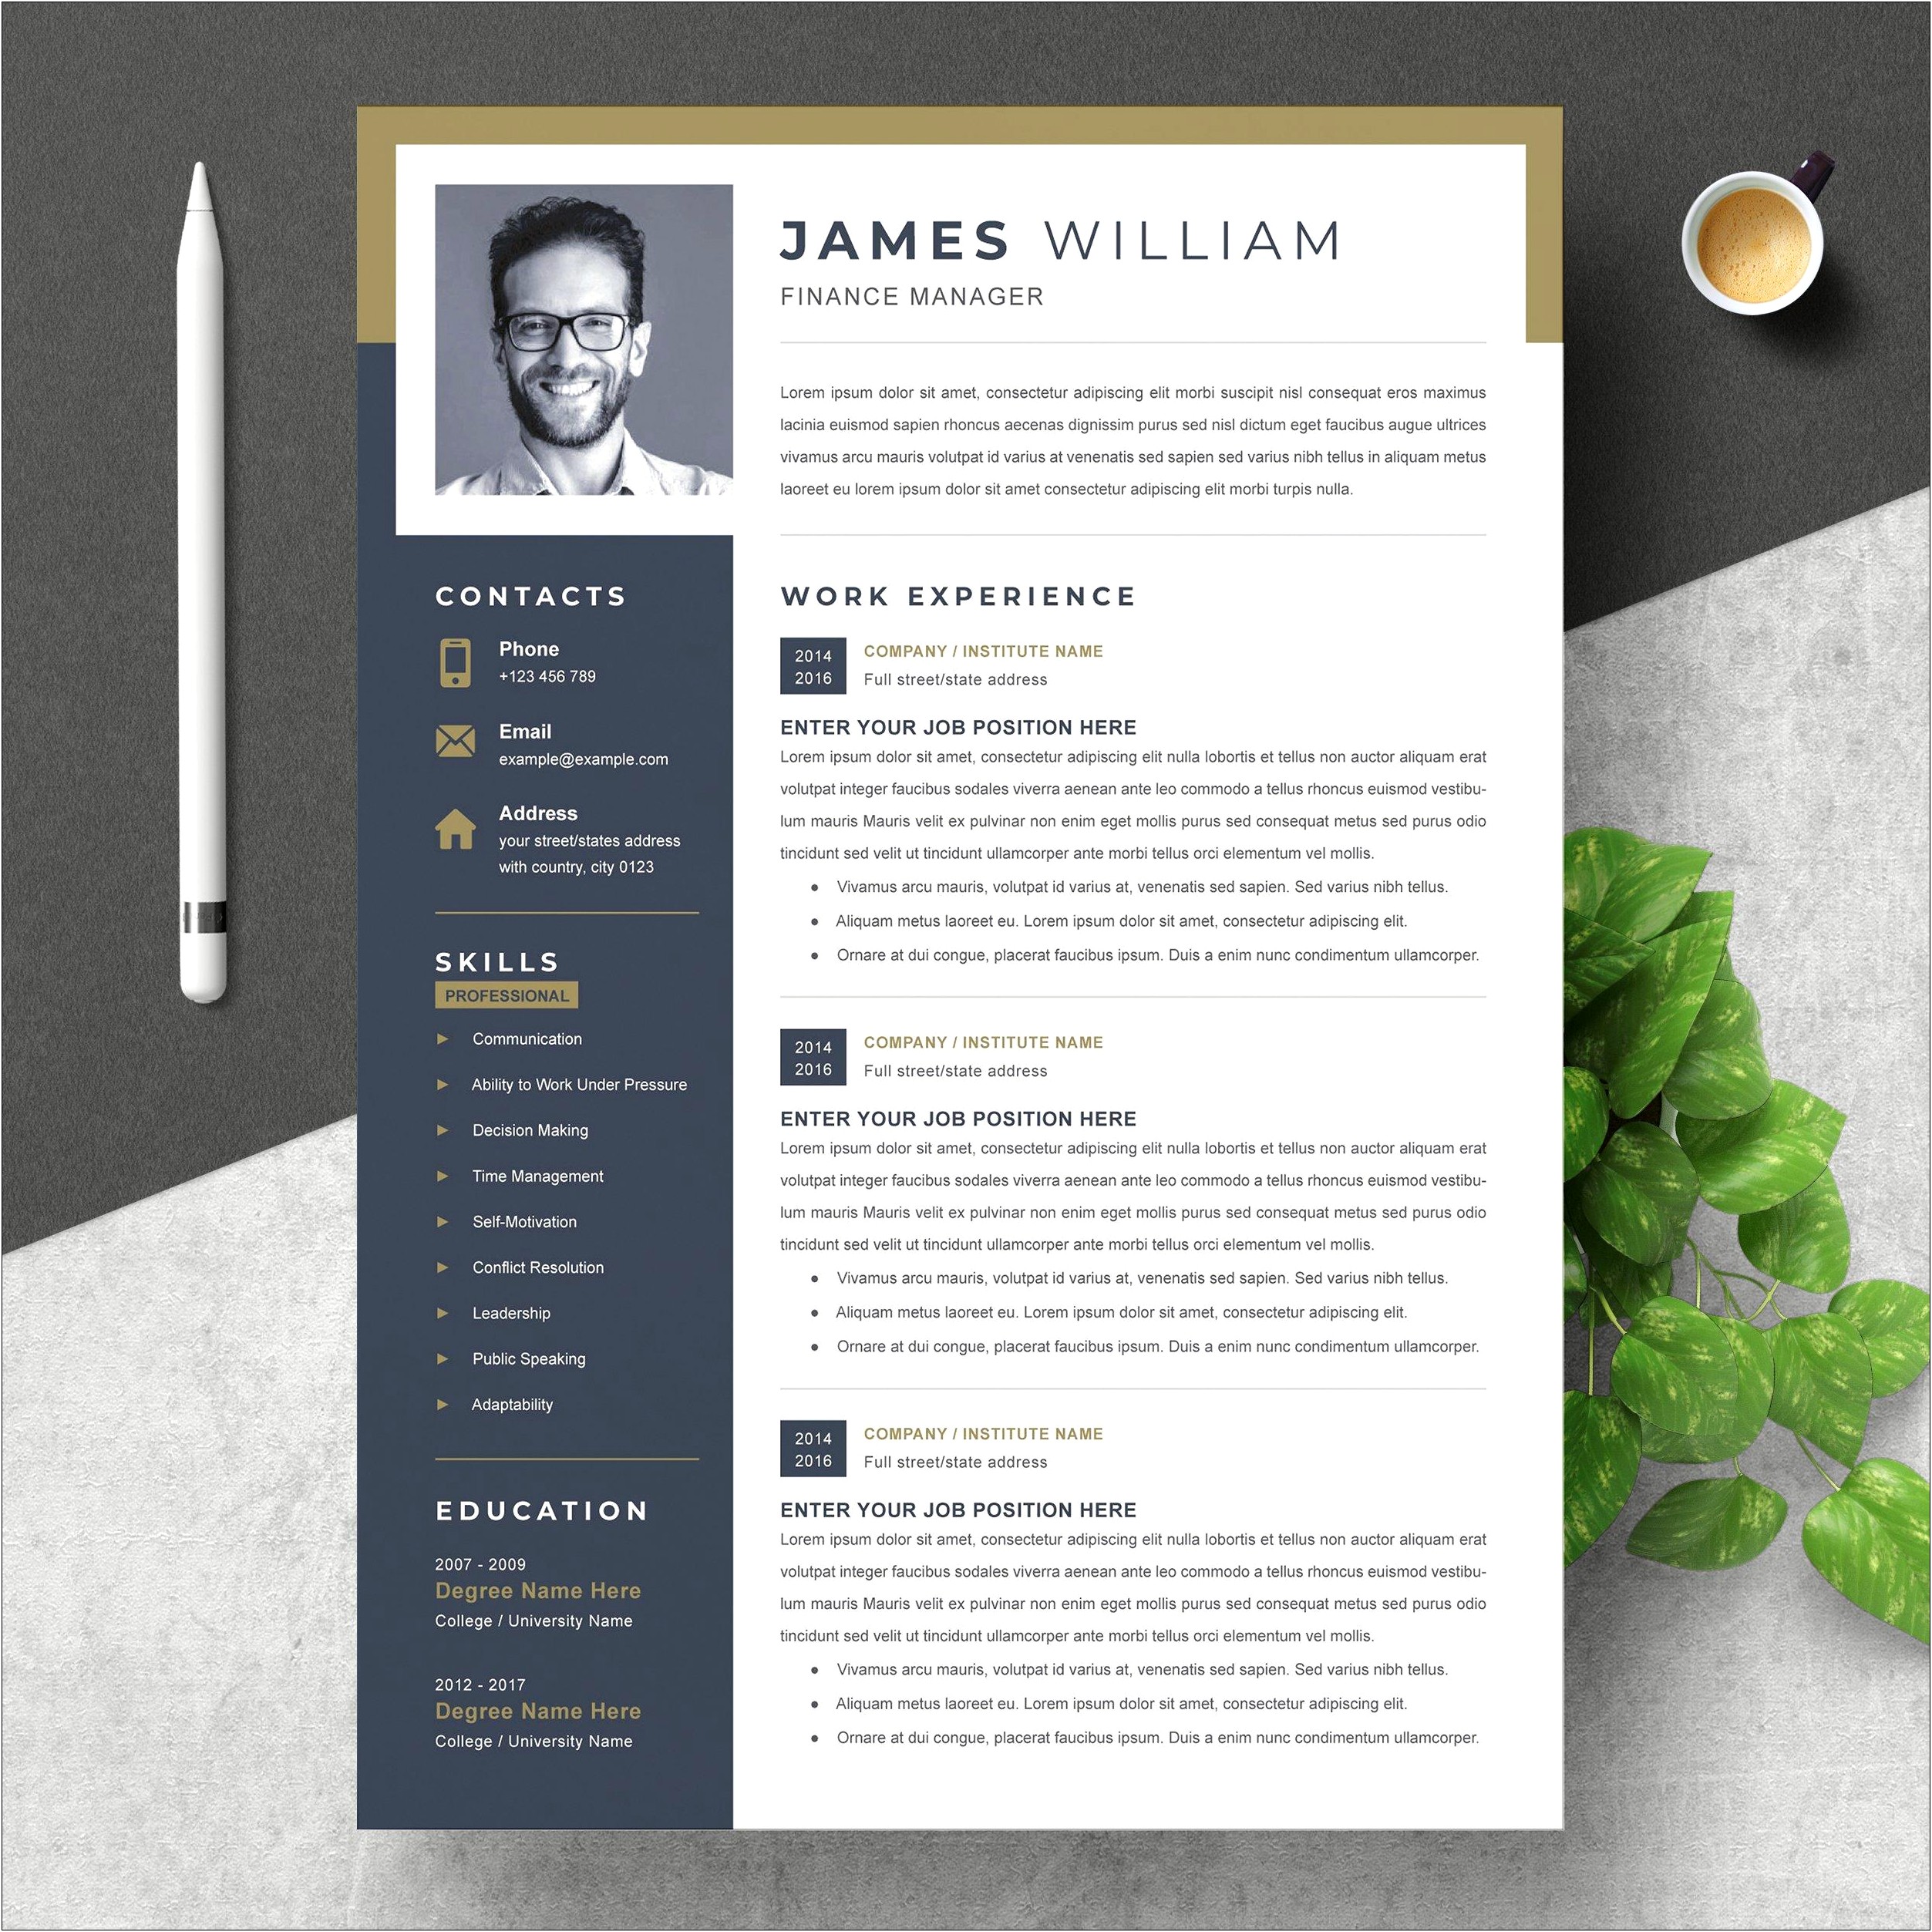 cv-template-design-word-free-download-resume-example-gallery